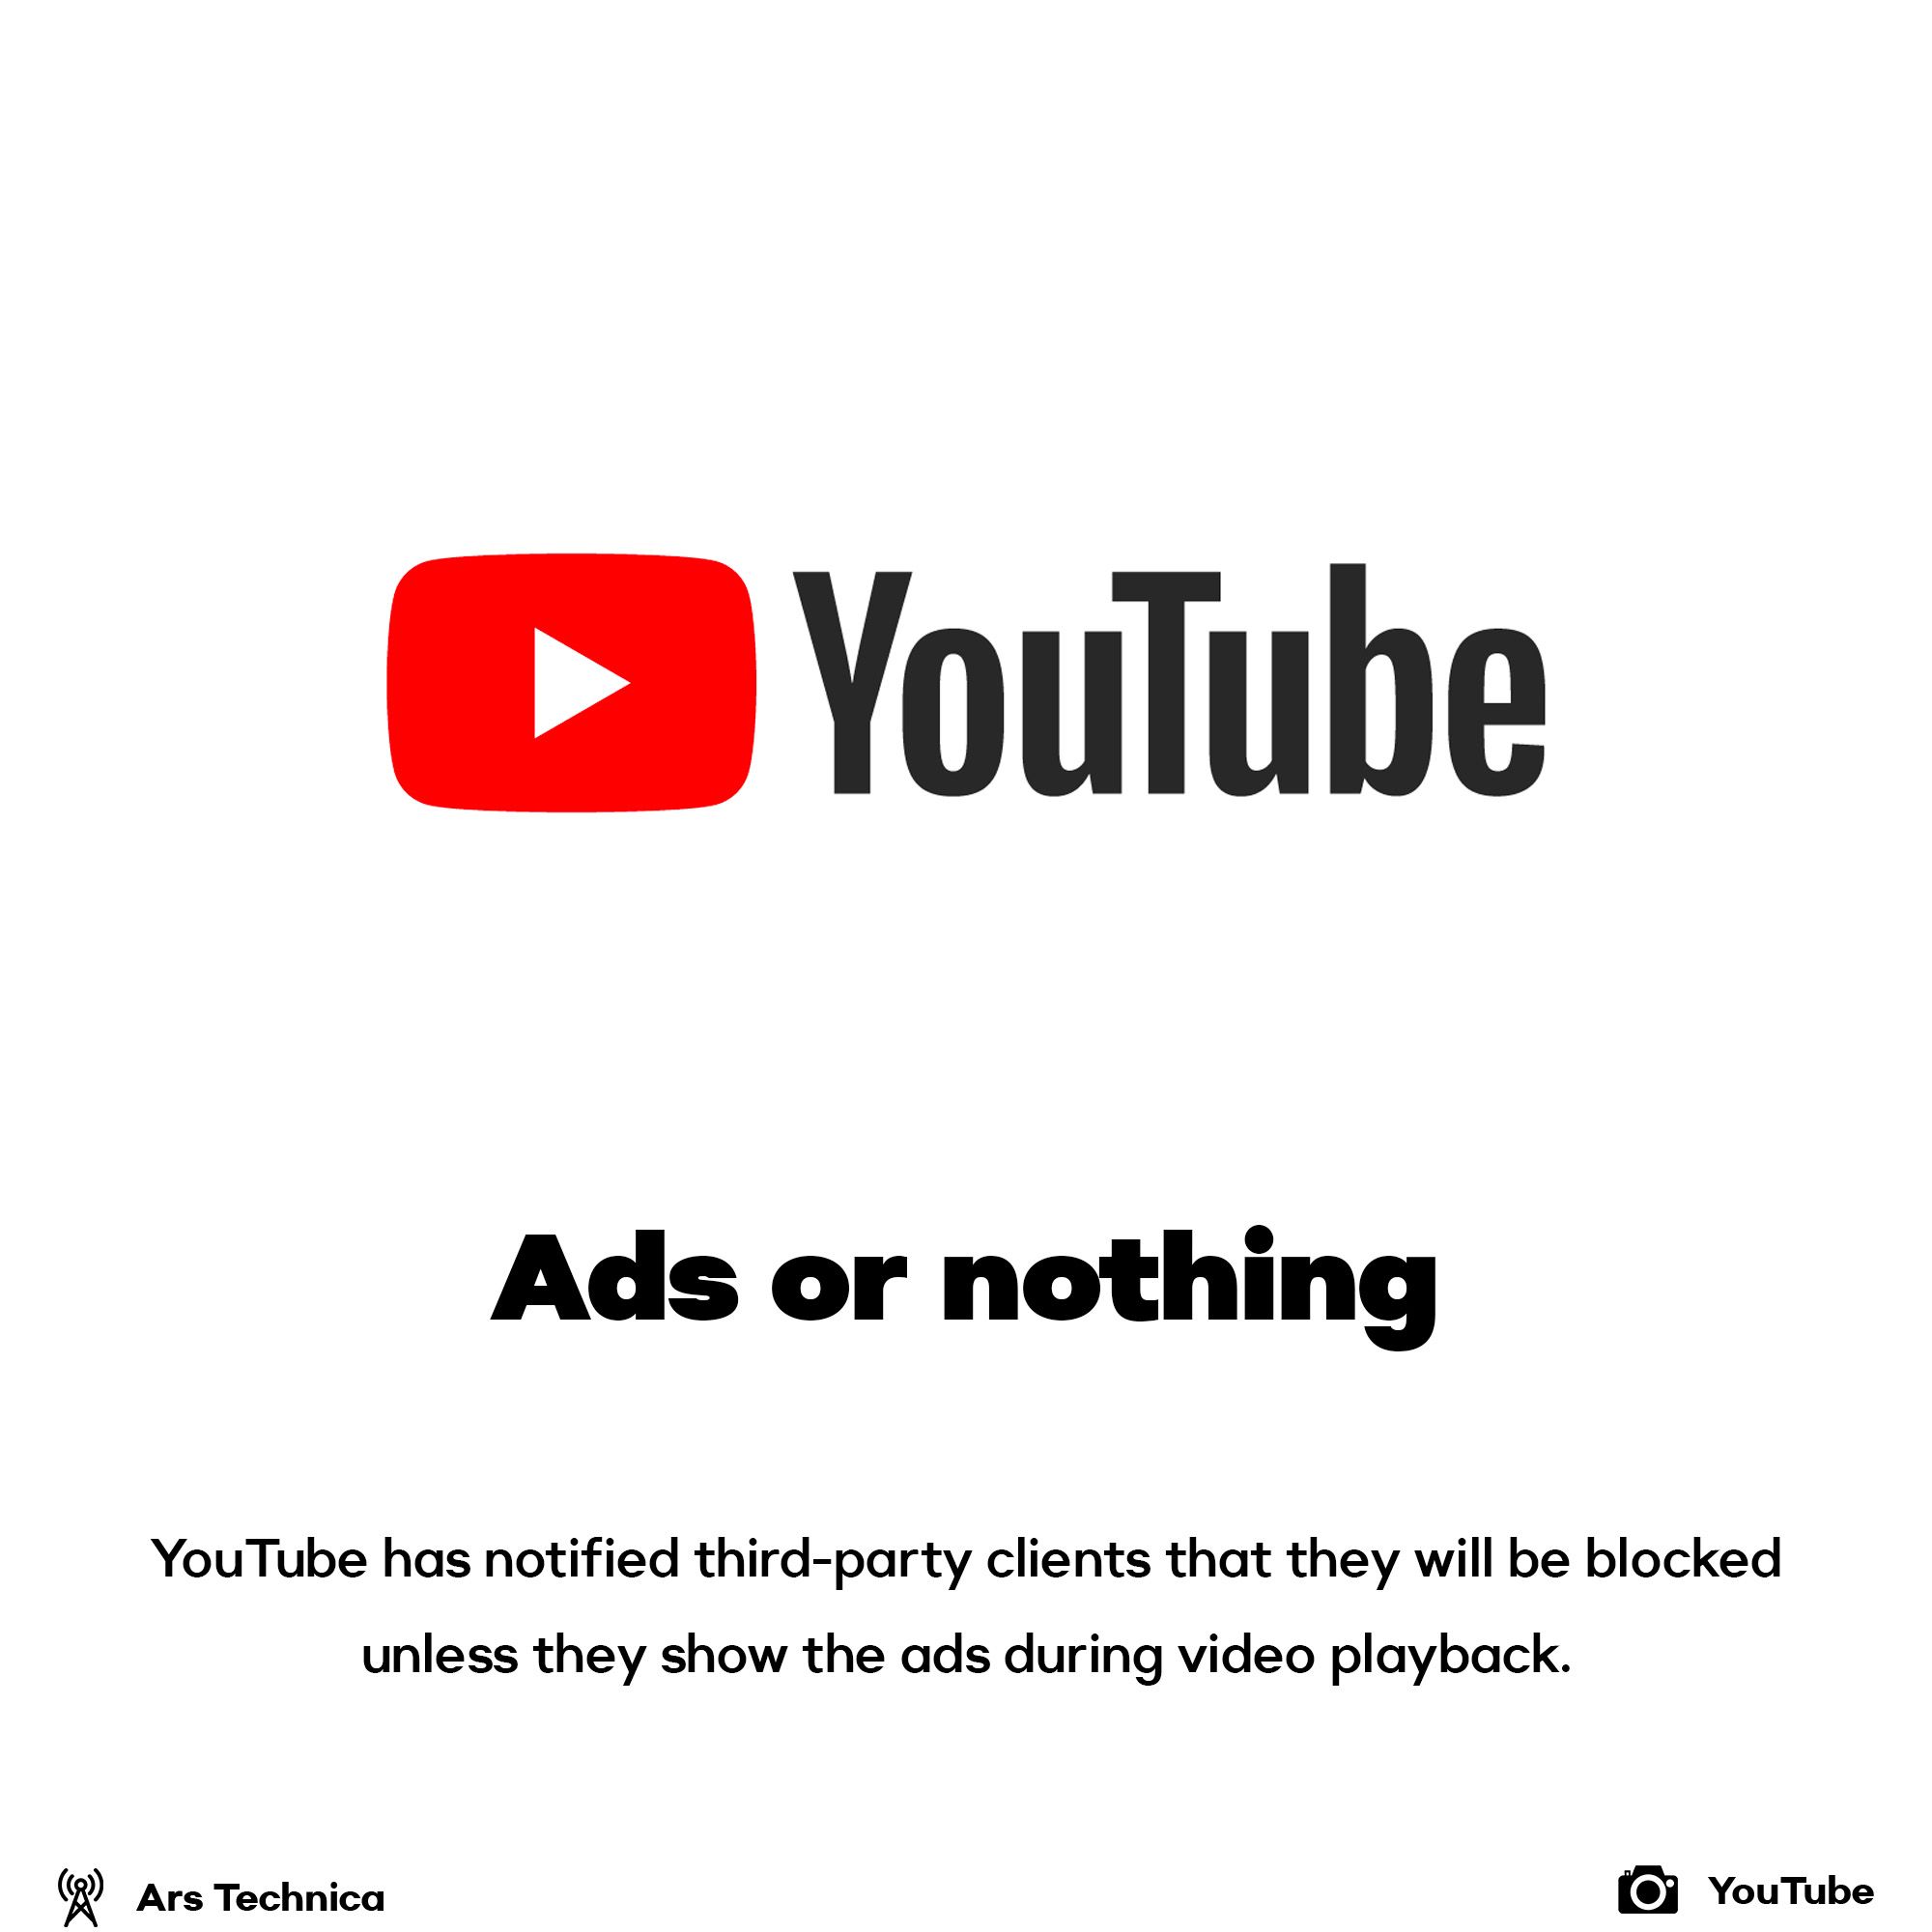 YouTube is going after 3rd party apps that are blocking ads